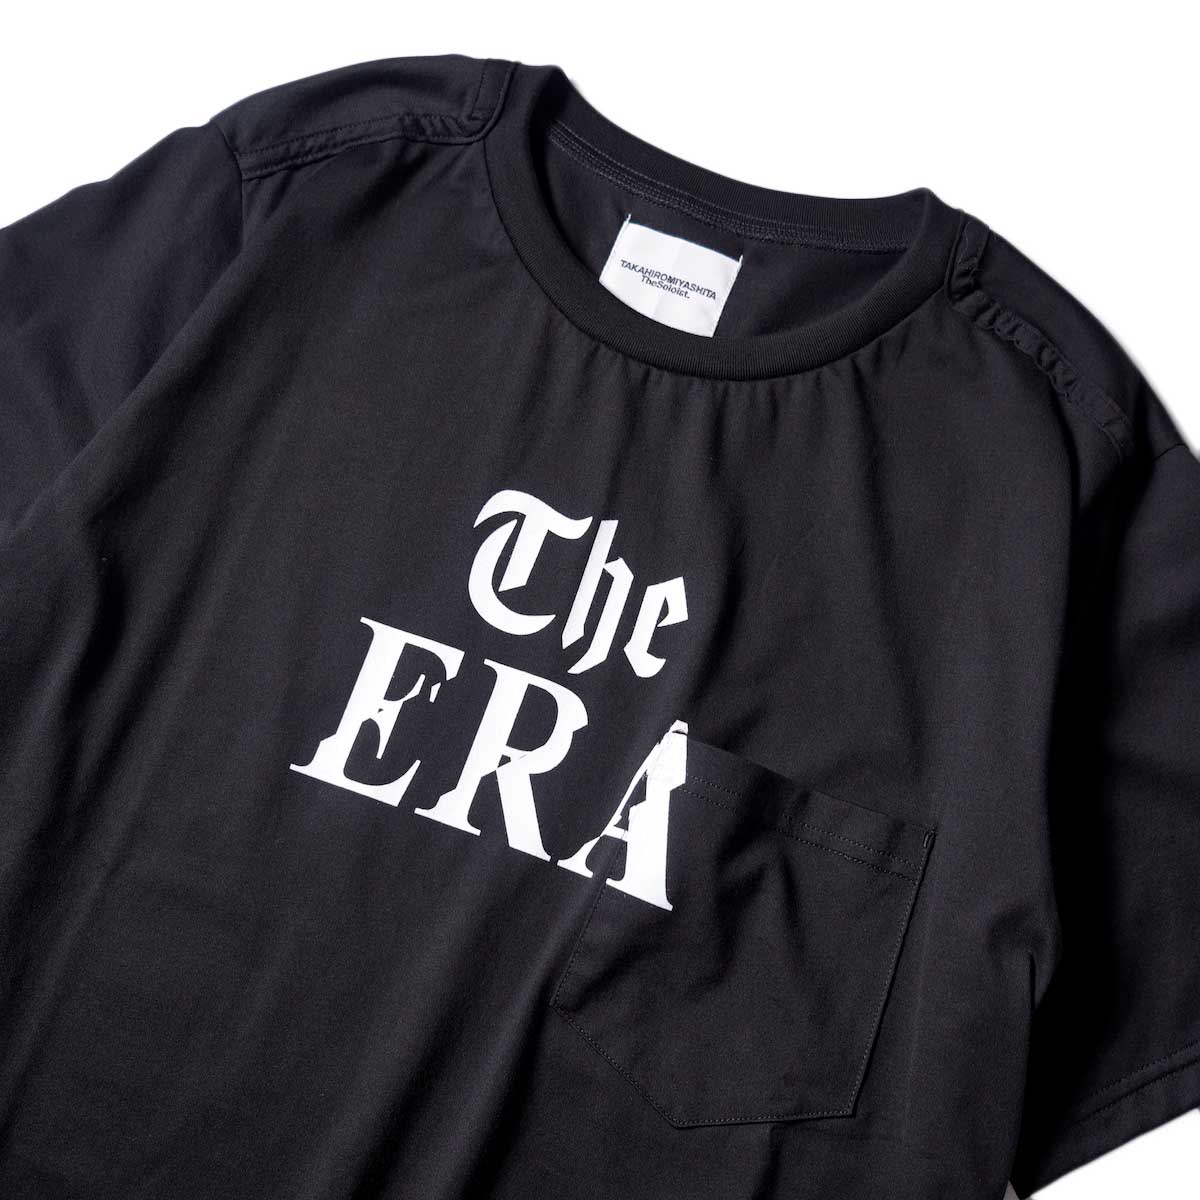 The Soloist / sc.0015AW22 the era. (s/s pocket tee) (Black)プリント